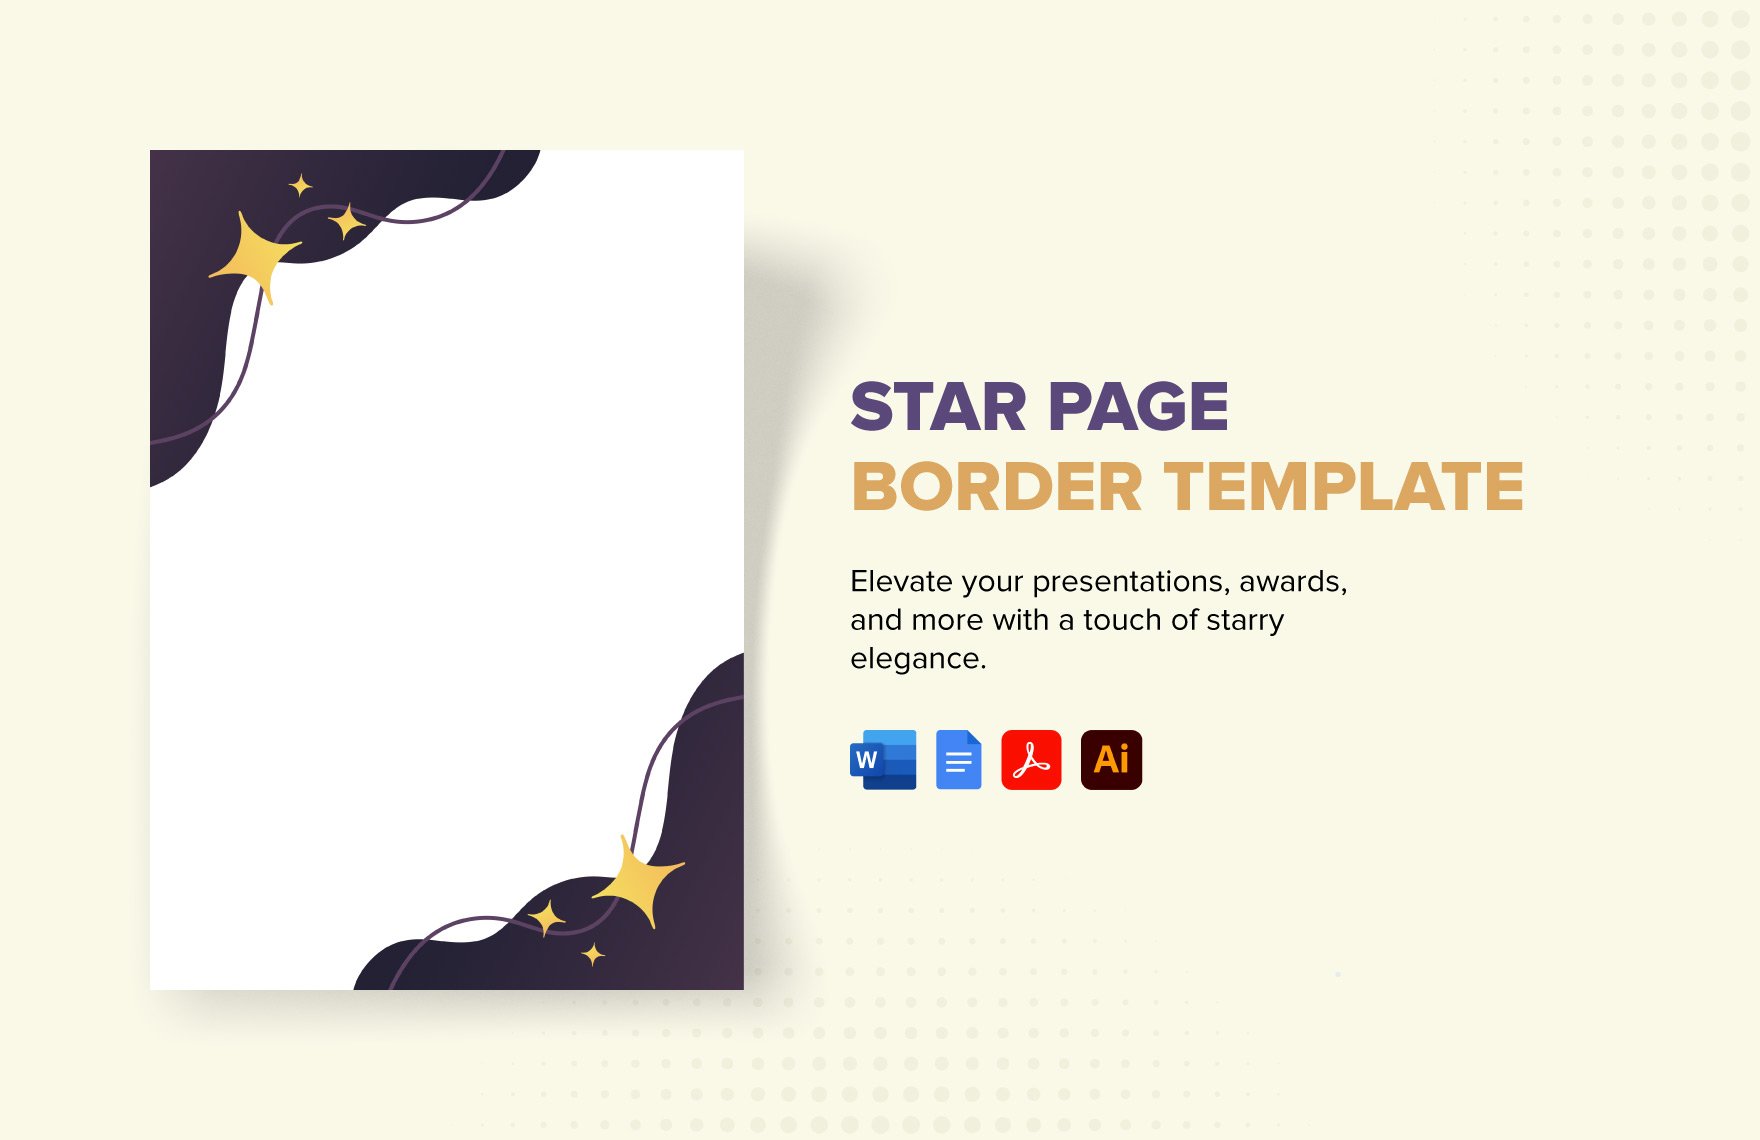 Star Page Border Template